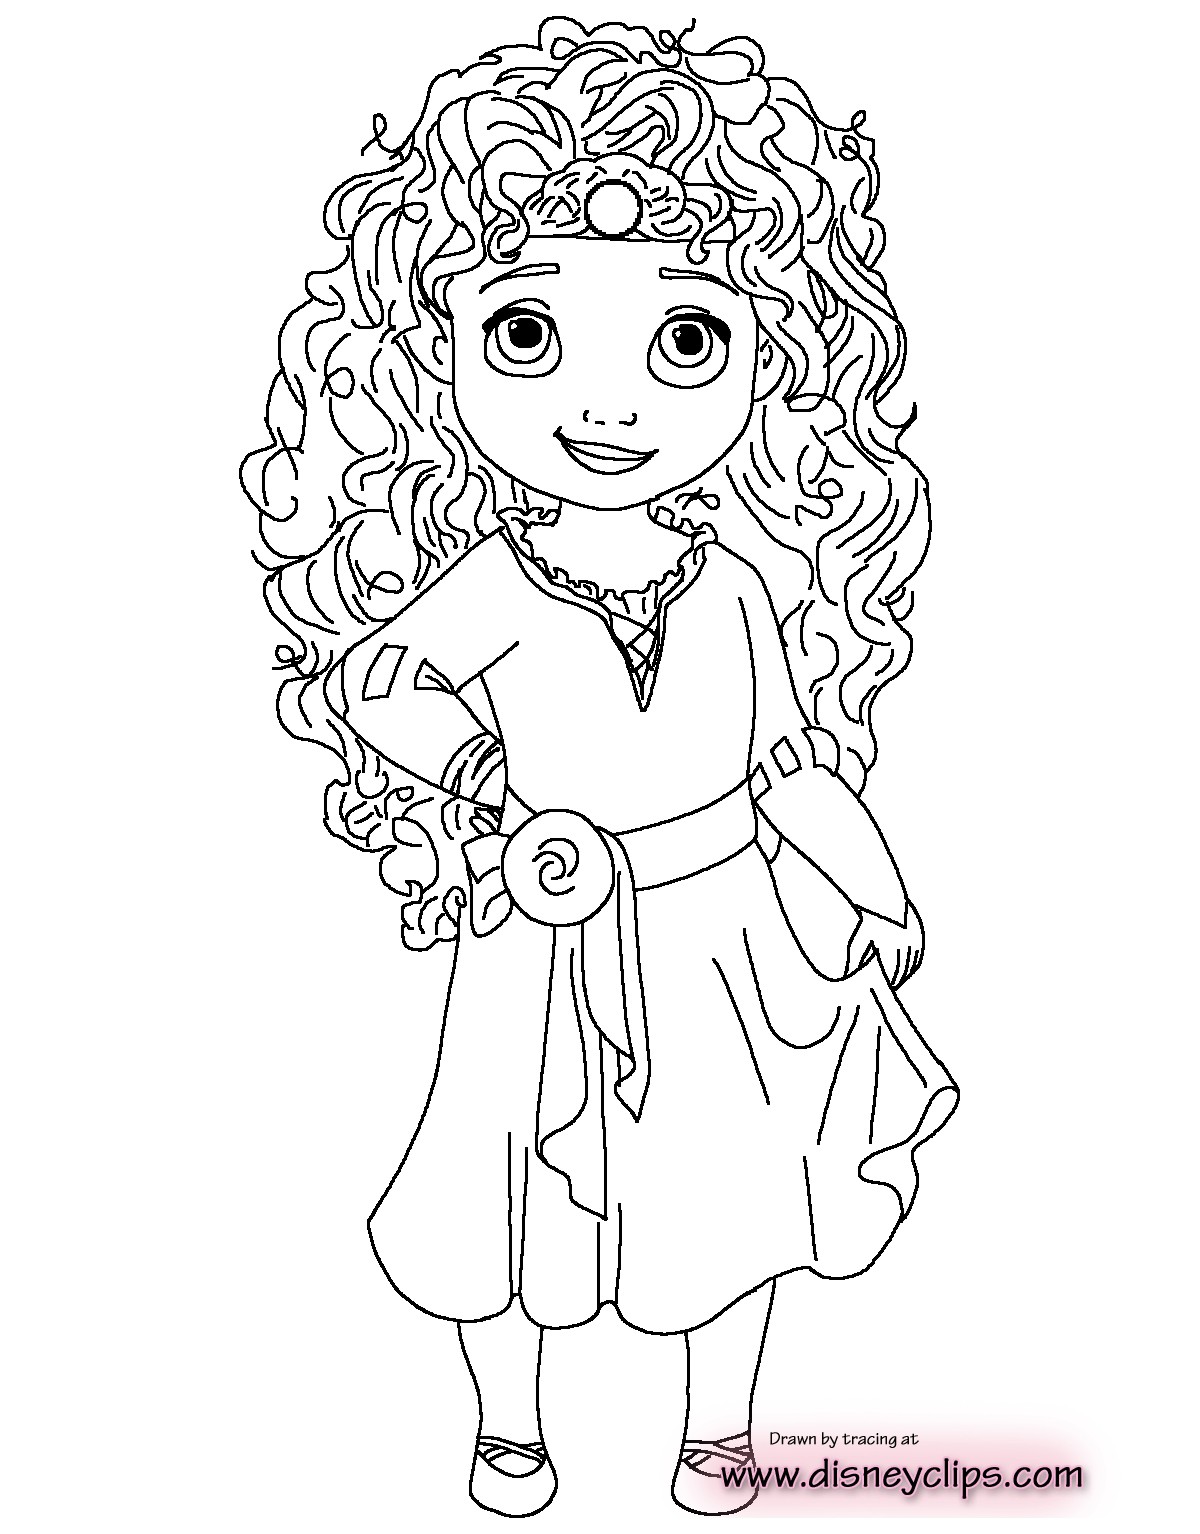 Coloring Pages Of Baby Princess - BubaKids.com